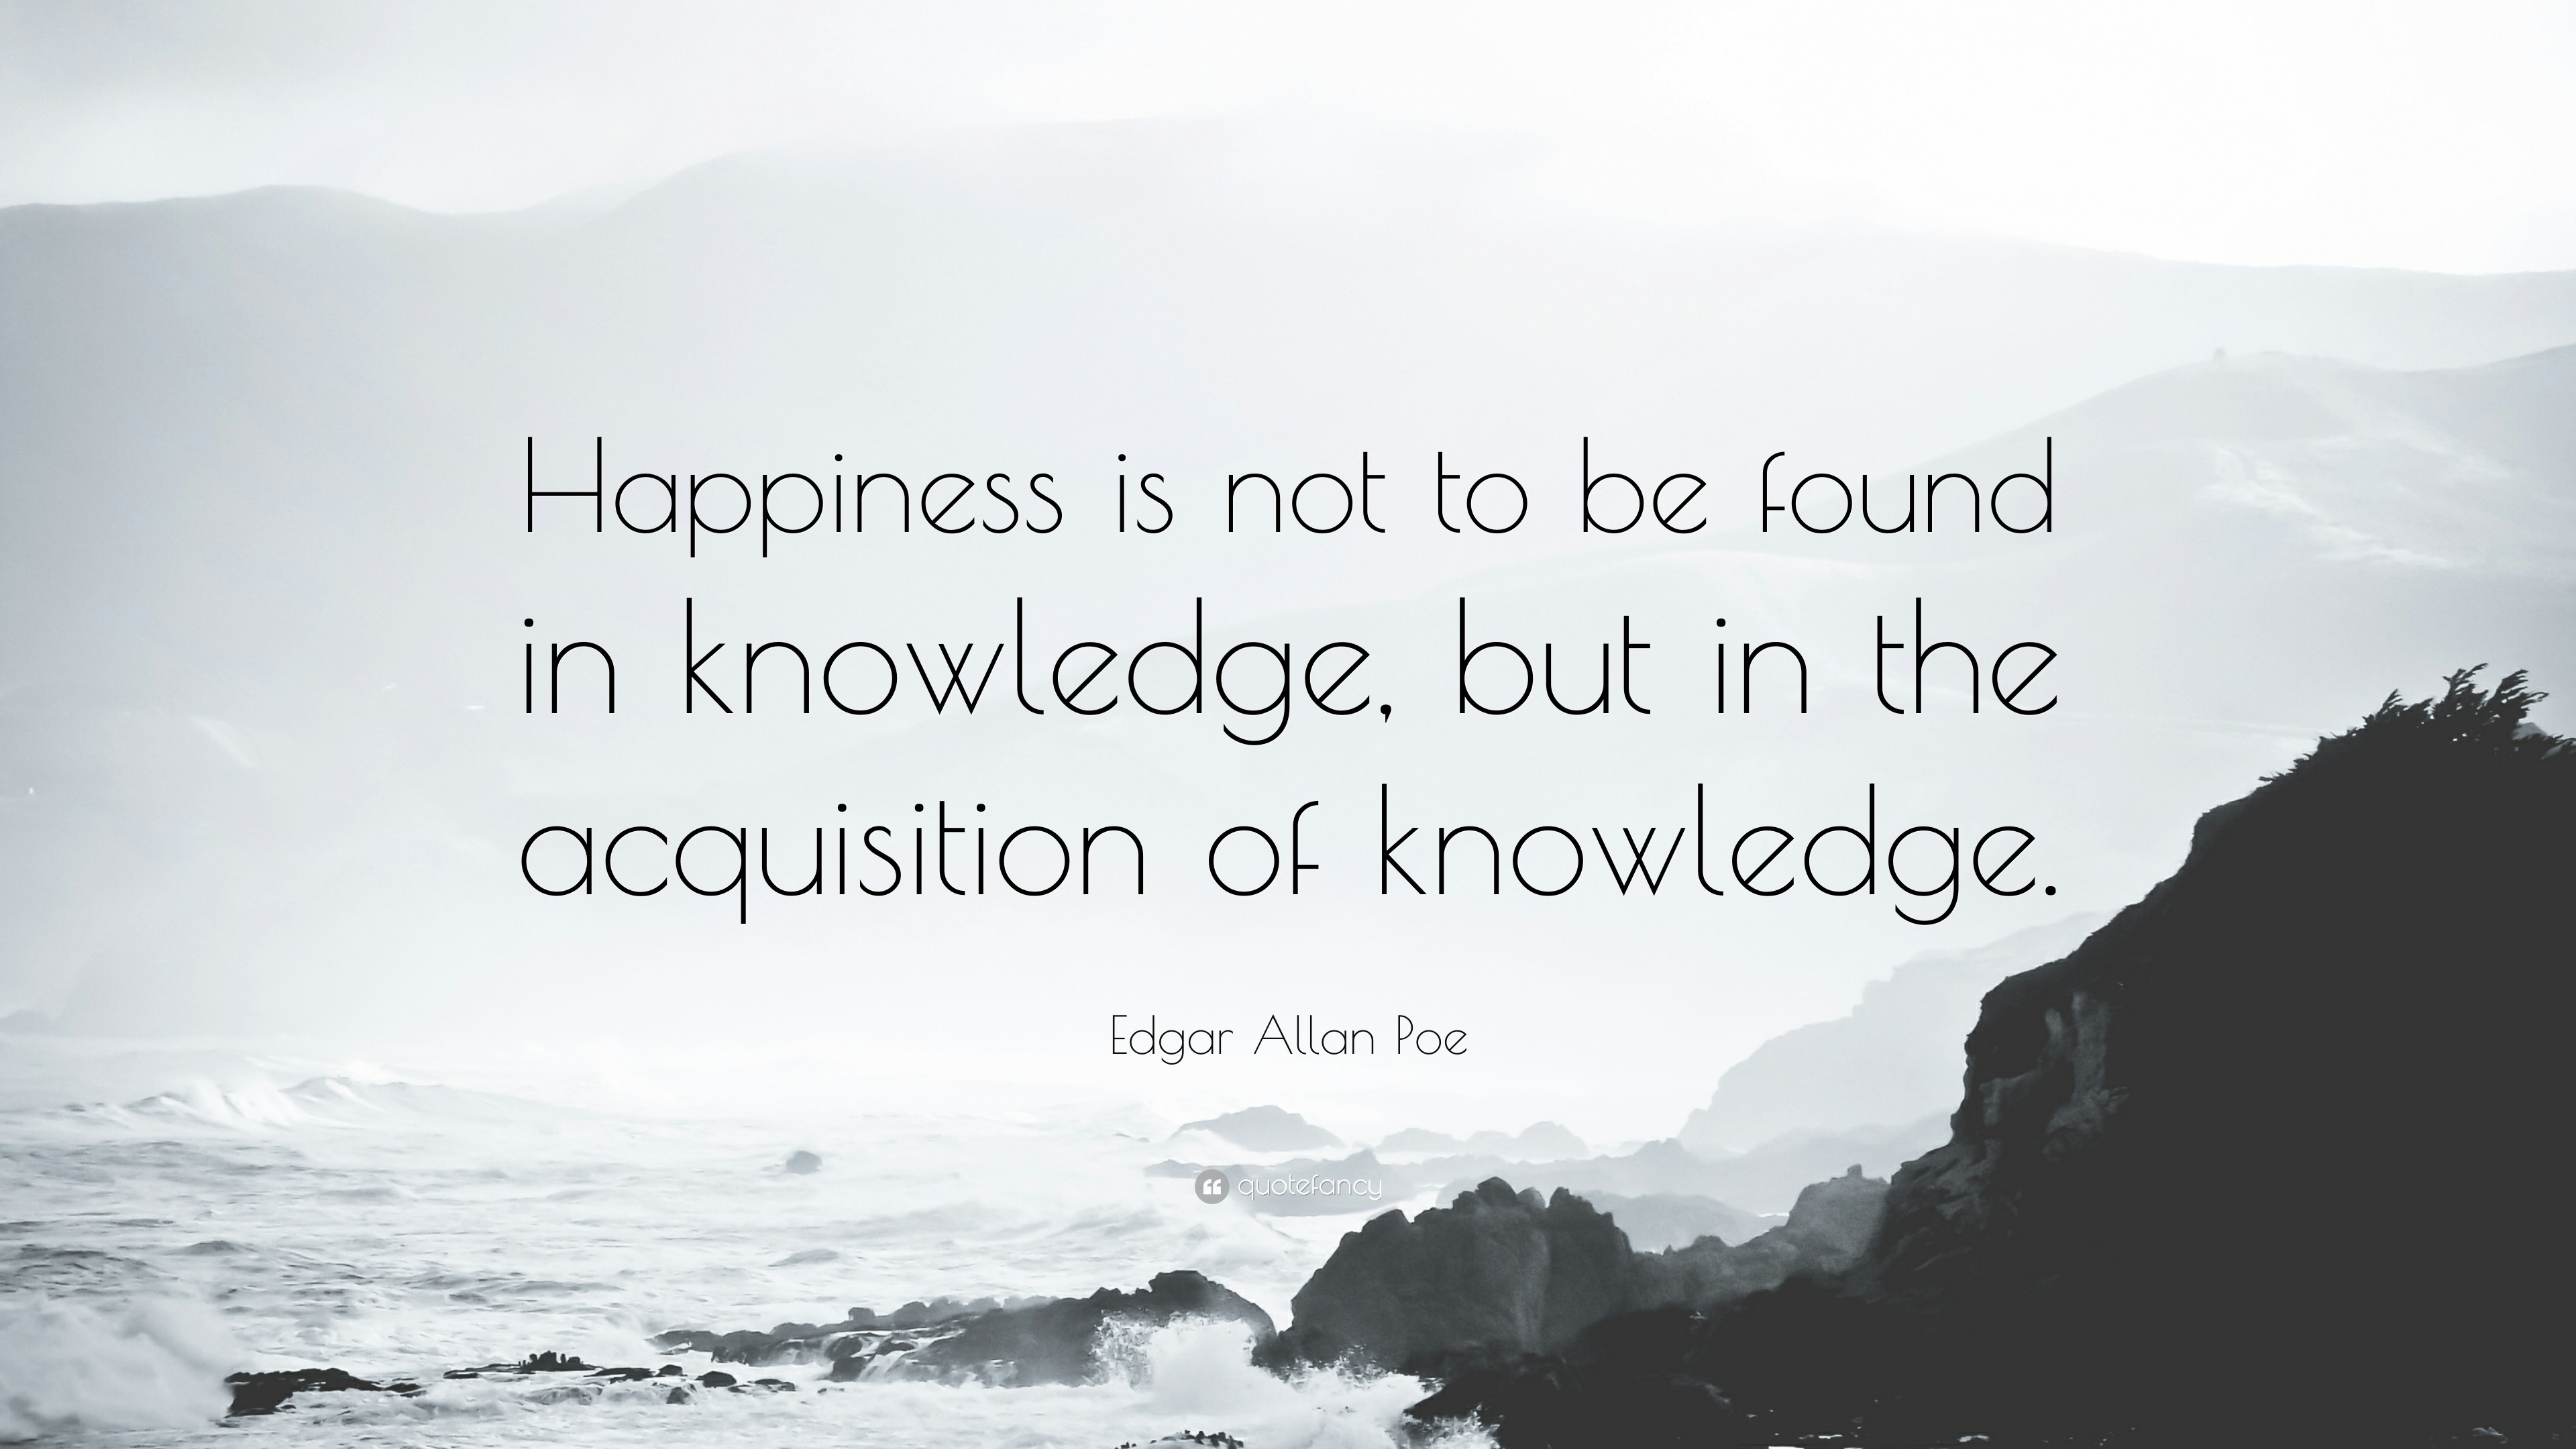 Edgar Allan Poe Quote: “Happiness is not to be found in knowledge, but in the acquisition